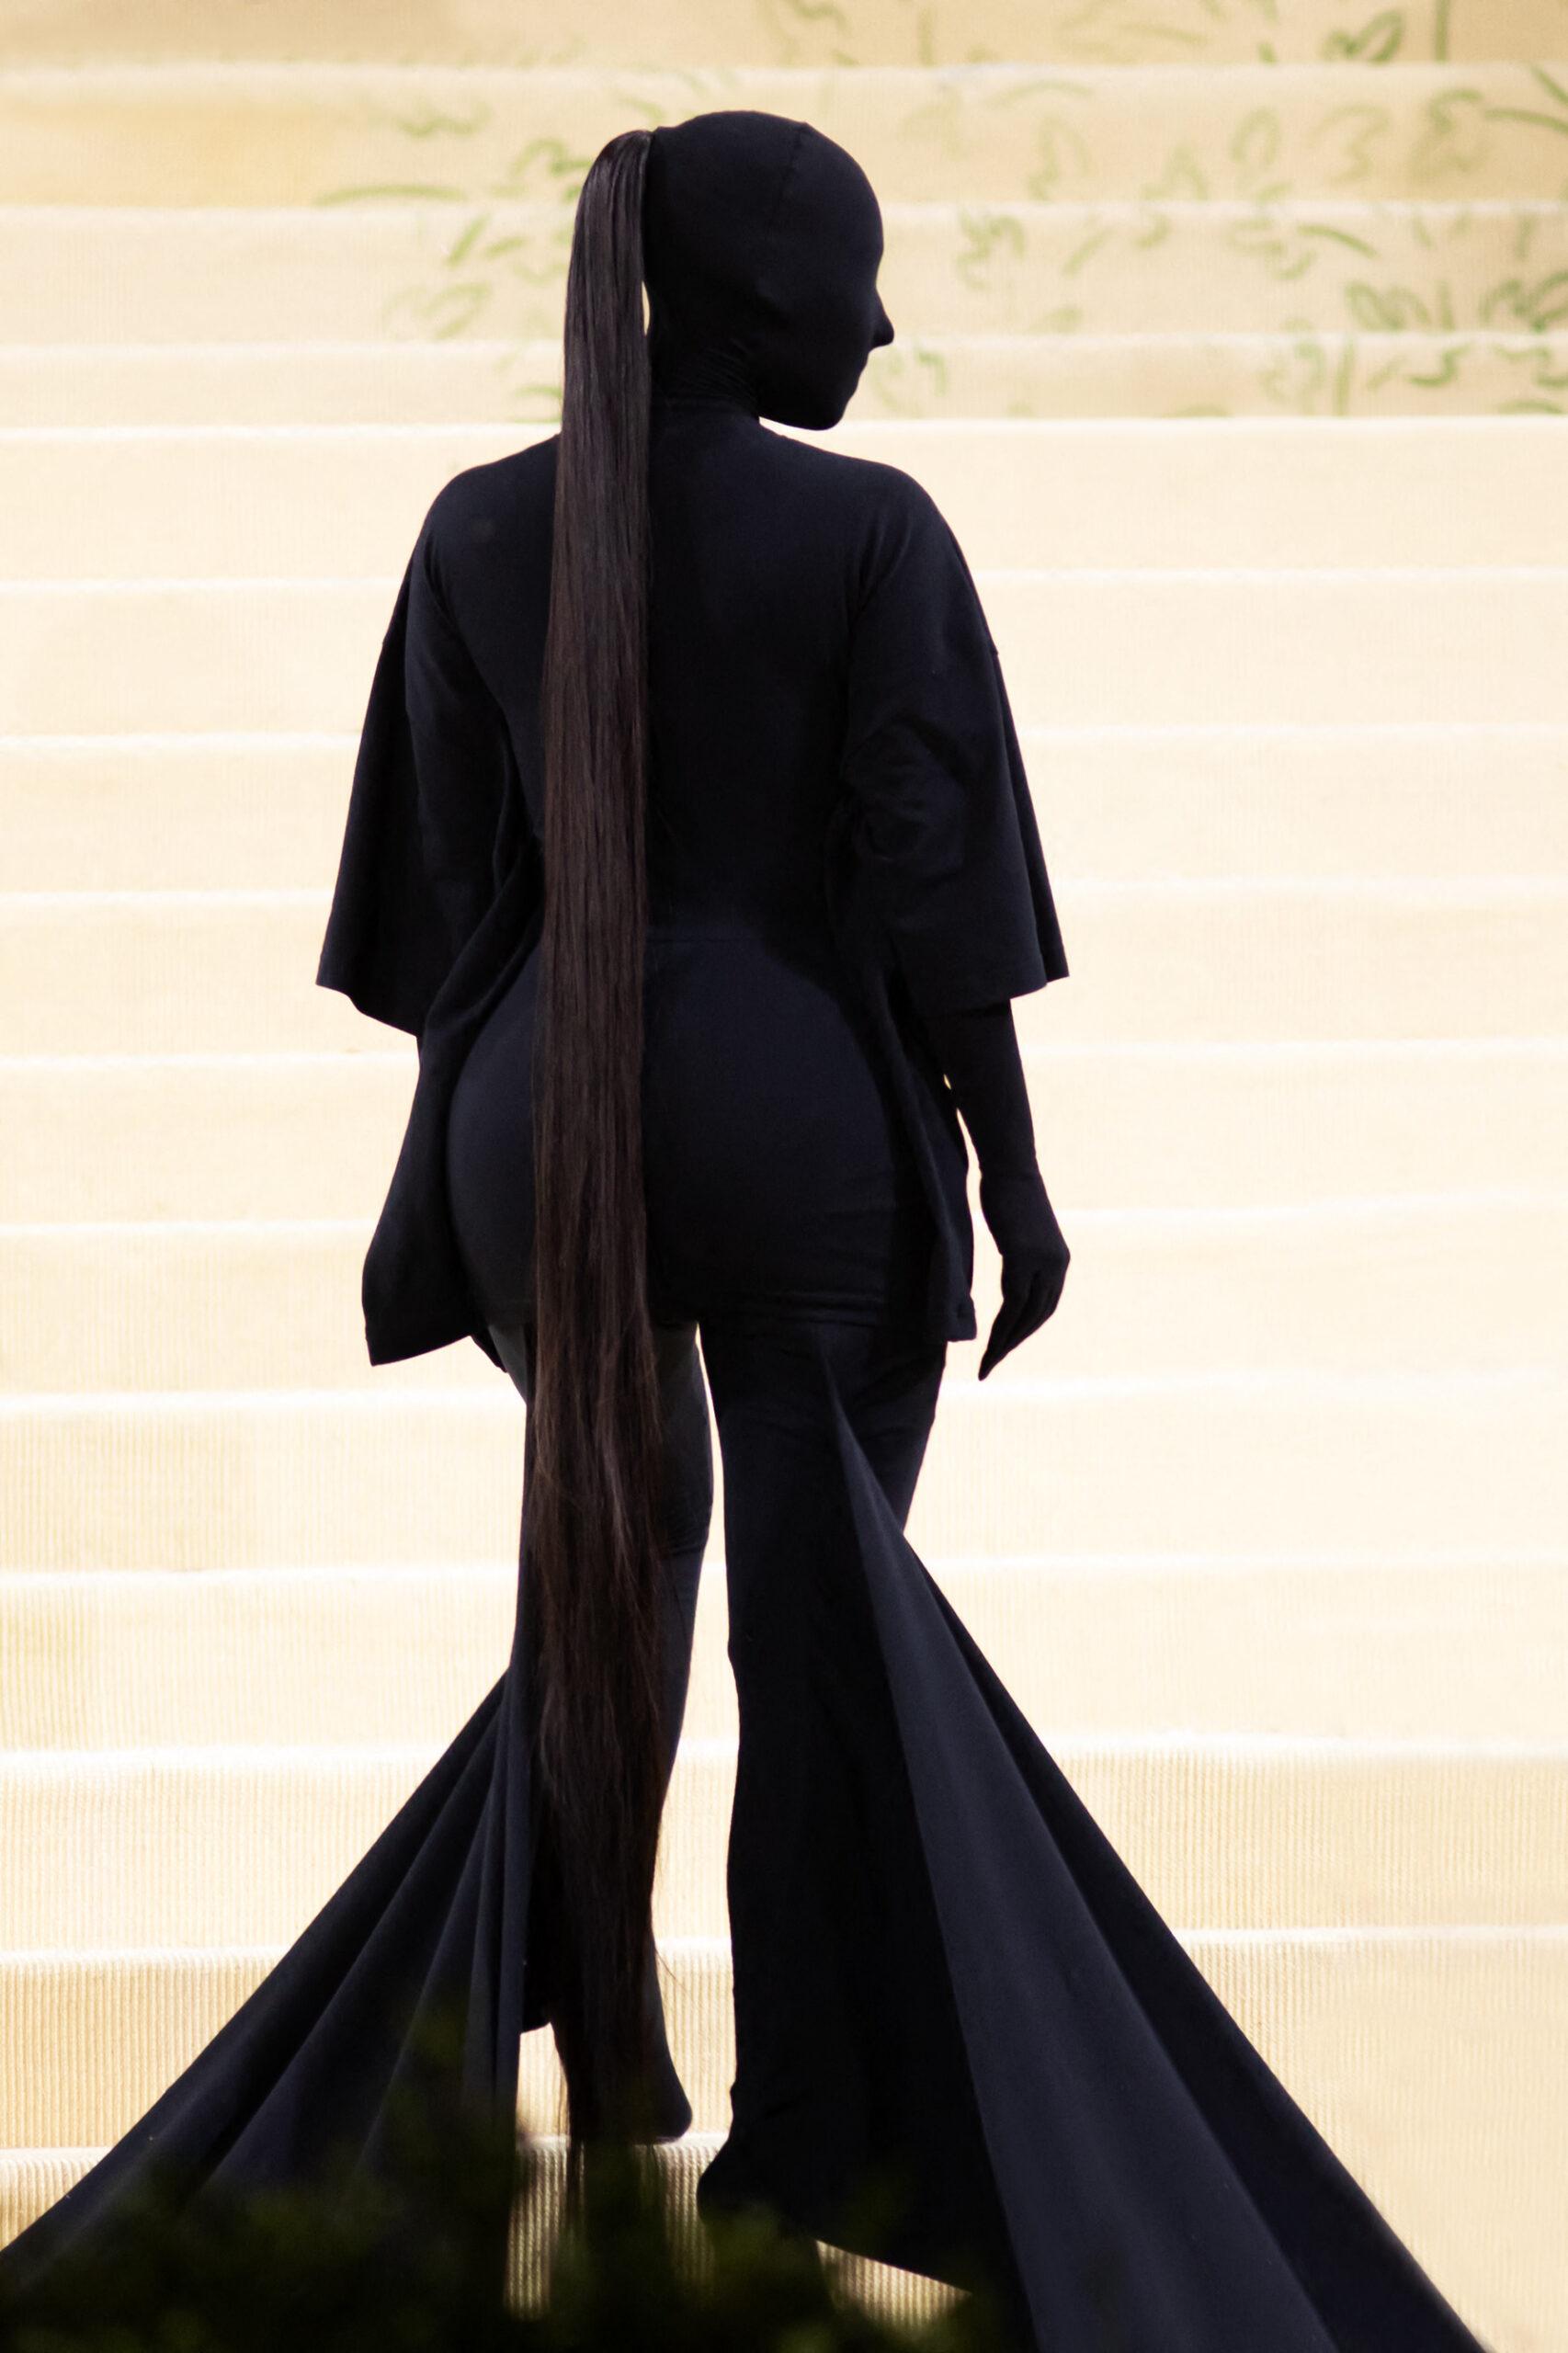 Kim Kardashian Will Reportedly Attend The 2023 Met Gala Despite Rumors Claiming Otherwise